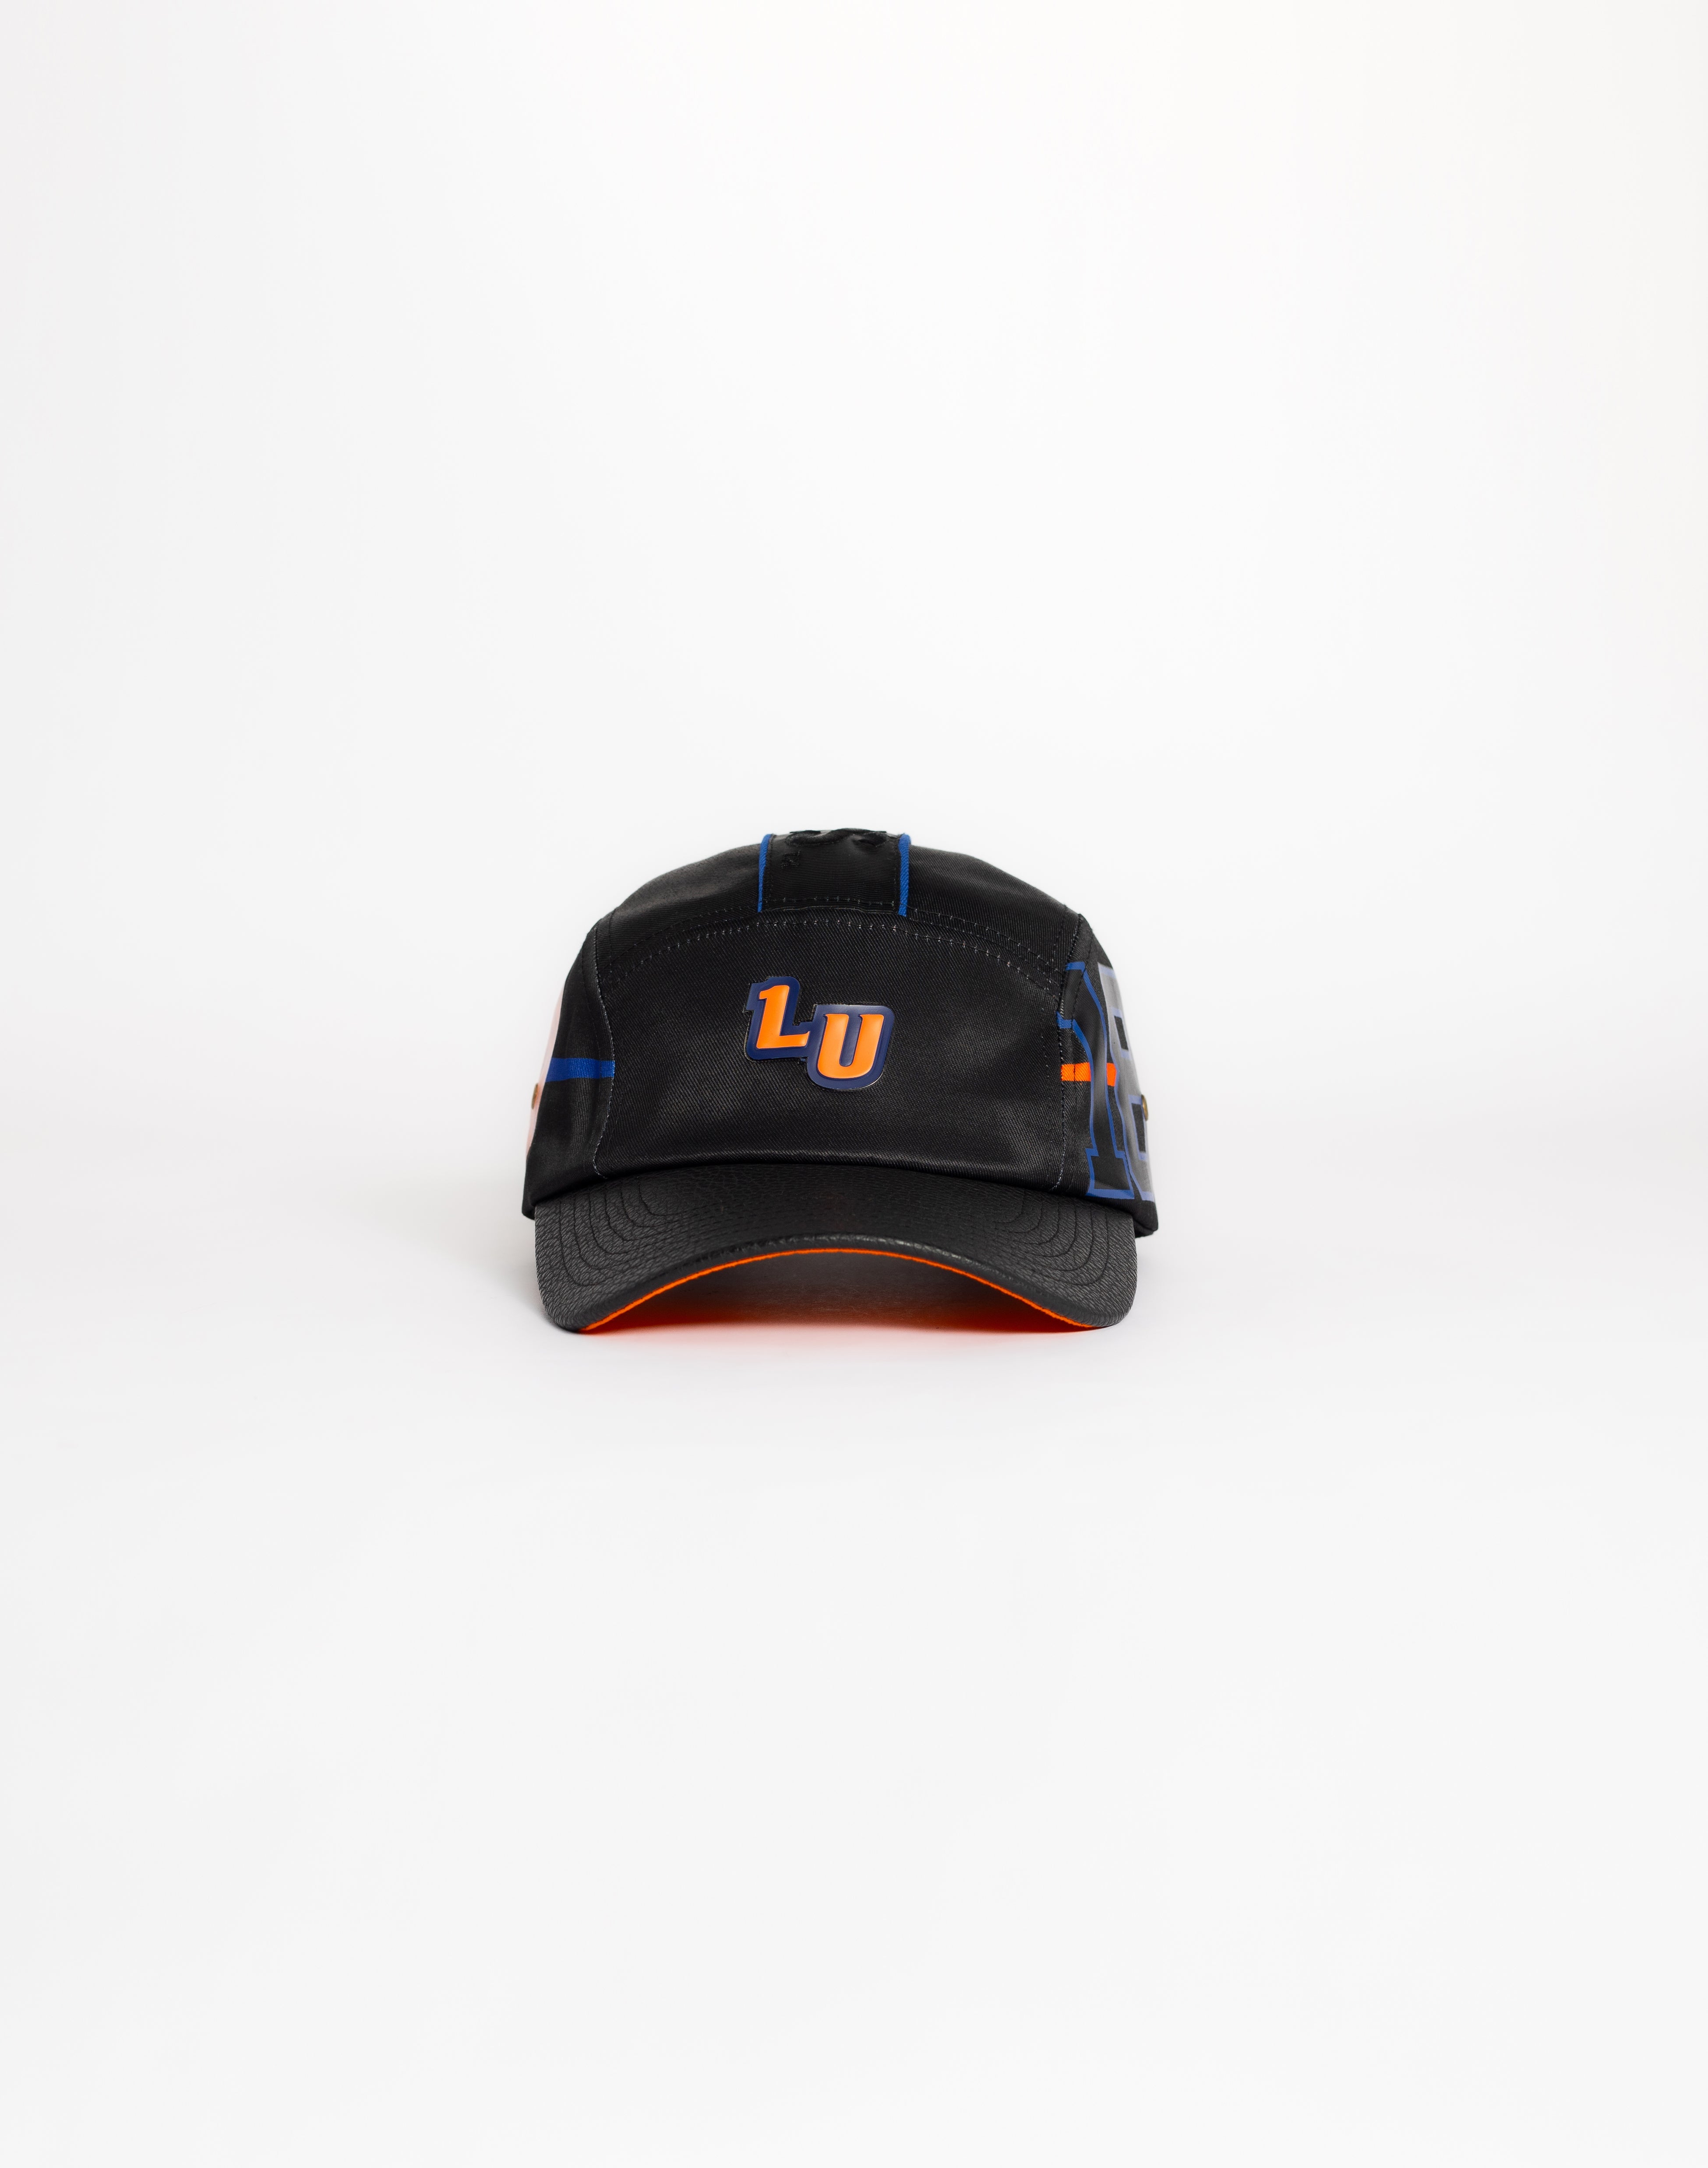 Lincoln University - HBCU Hat - TheYard Blackout